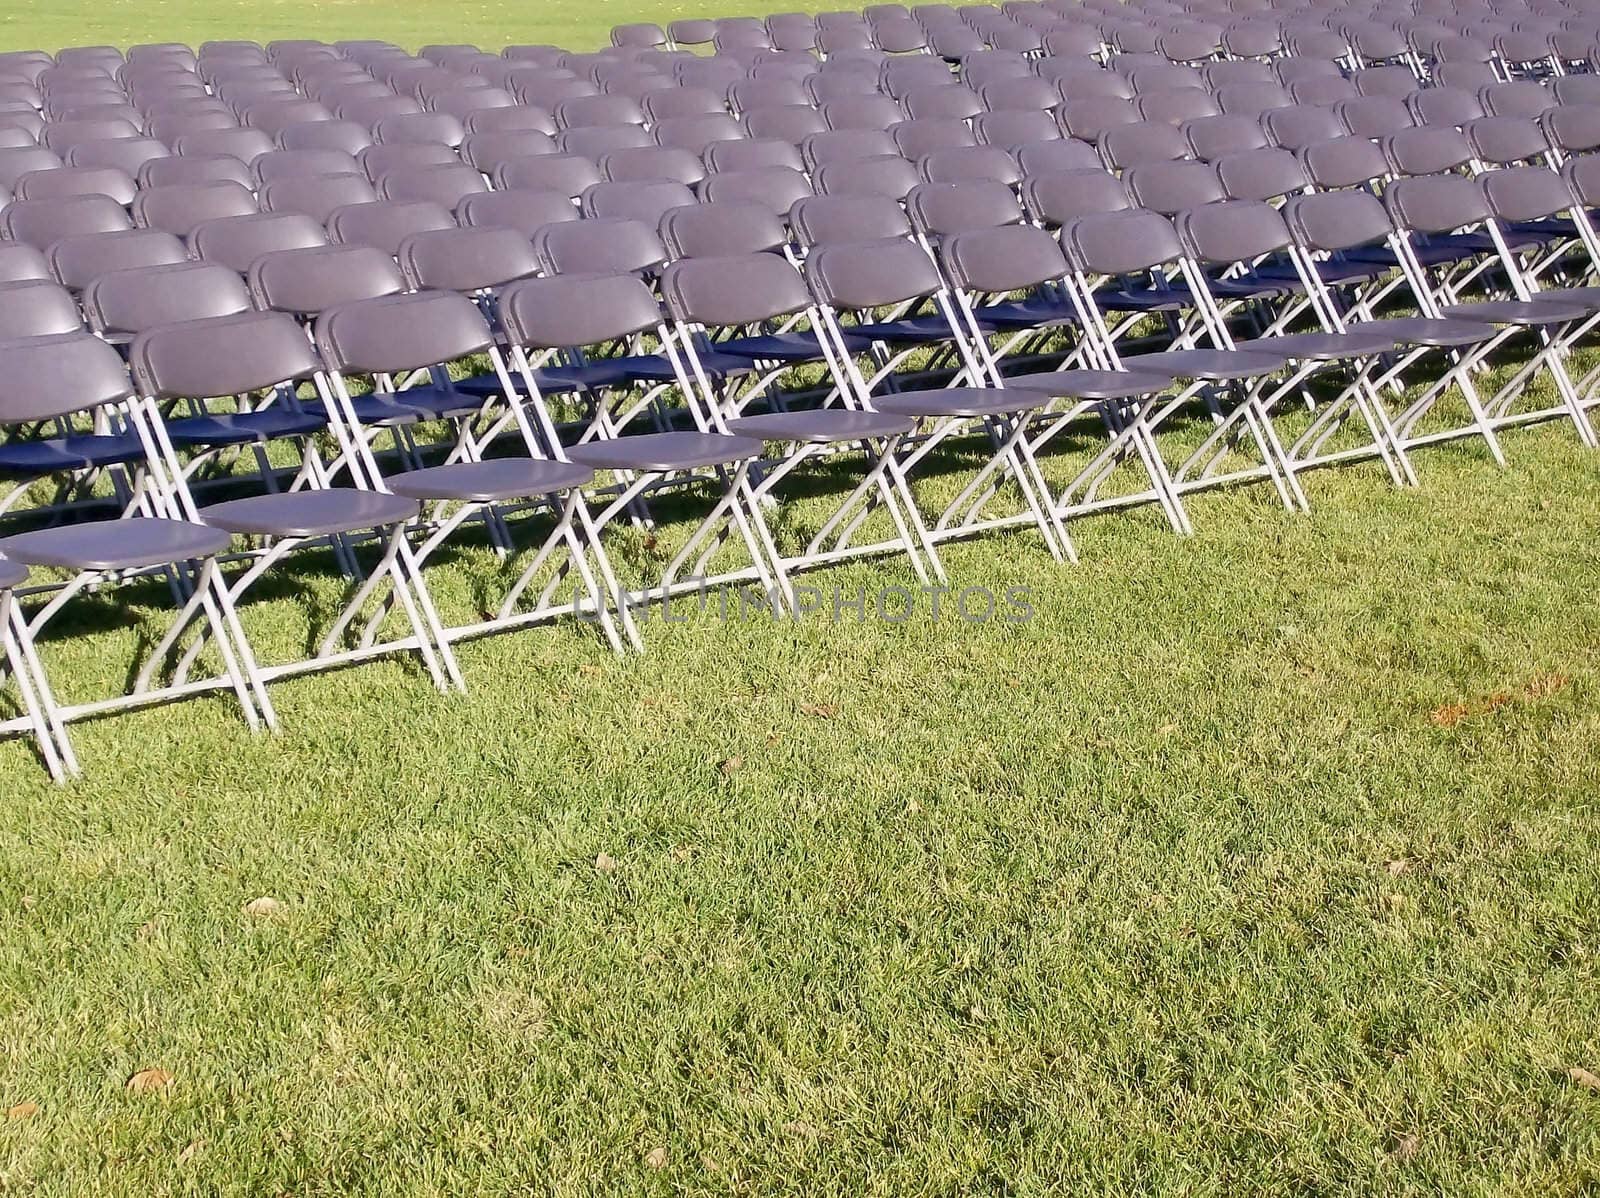 Rows of Chairs by watamyr